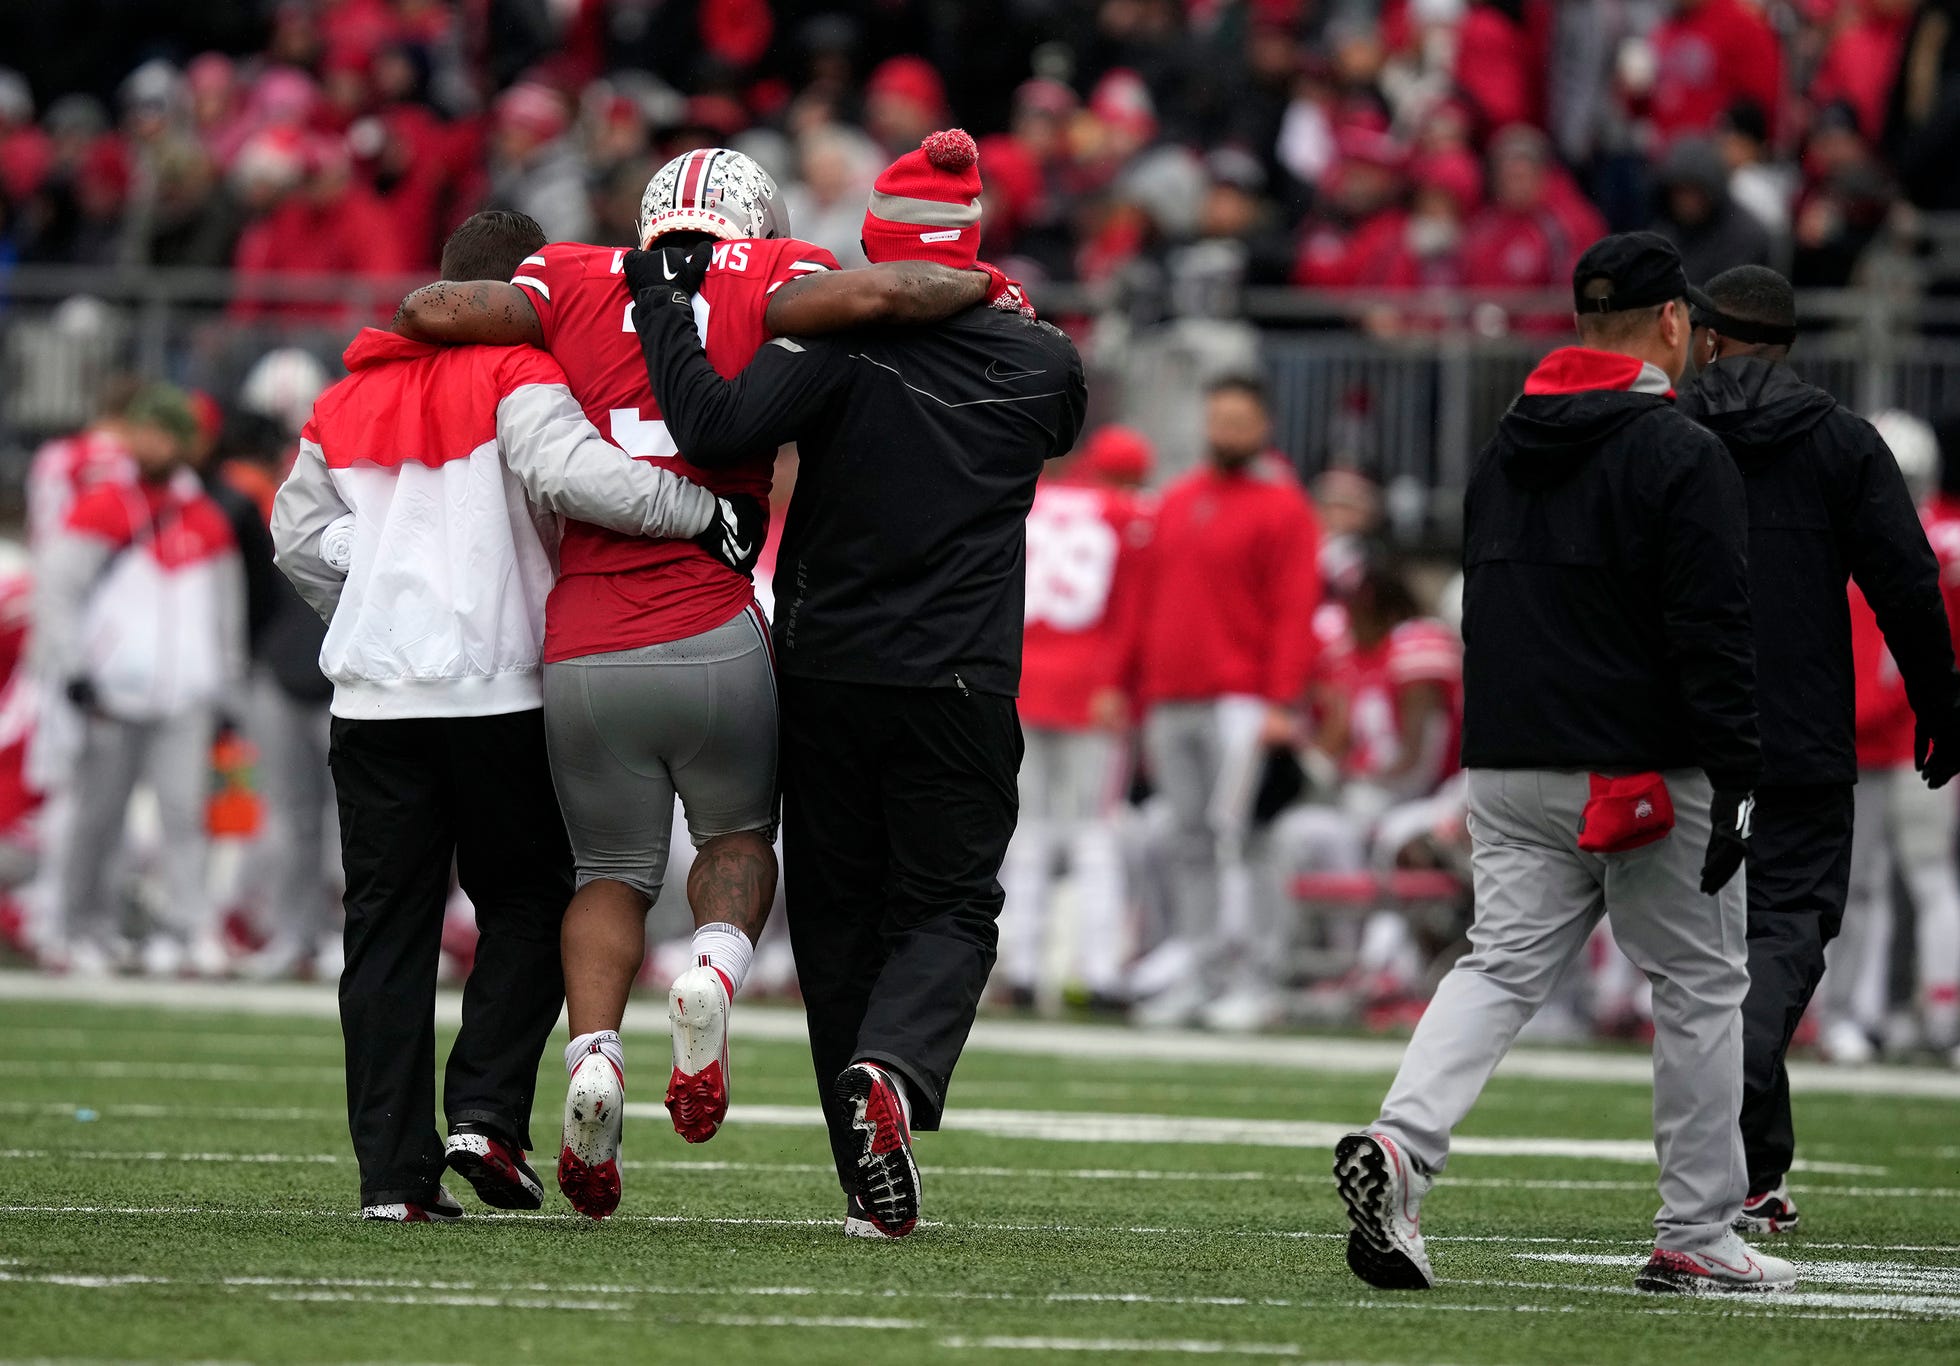 Ohio State football injury woes continued to mount